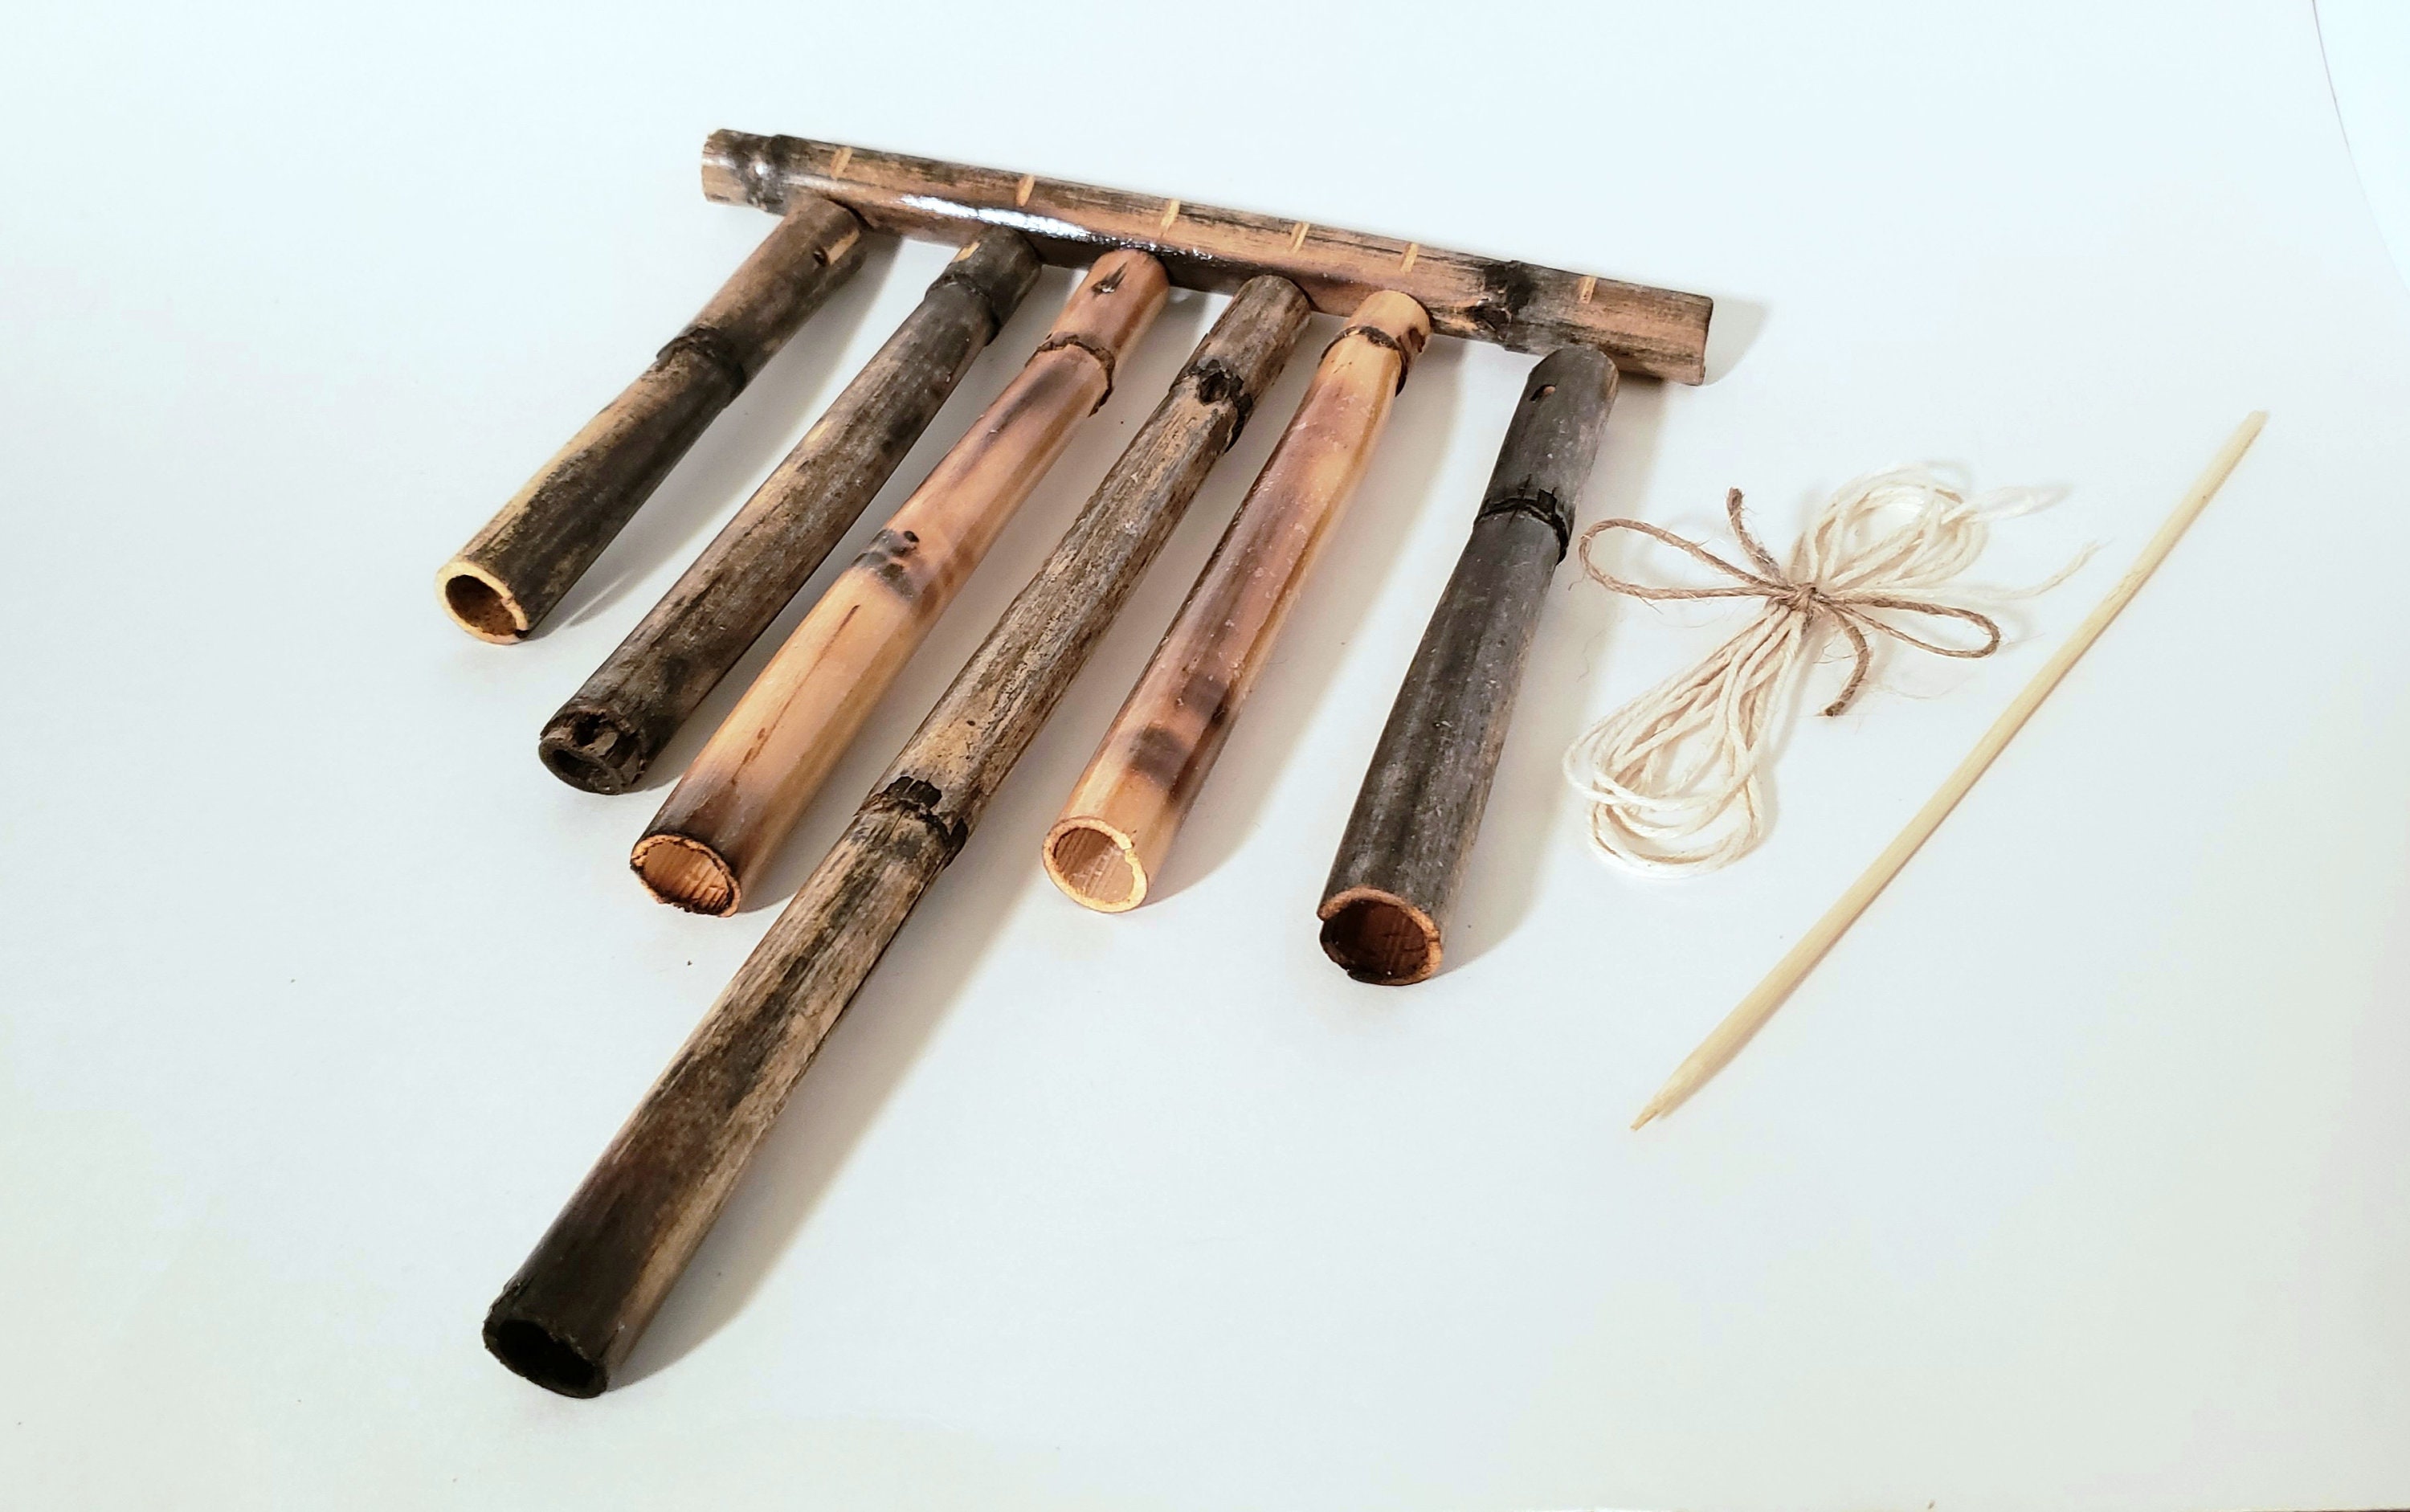 Bamboo Sticks , 9 Bamboo for Crafts, Wood for Crafts, Green Bamboo